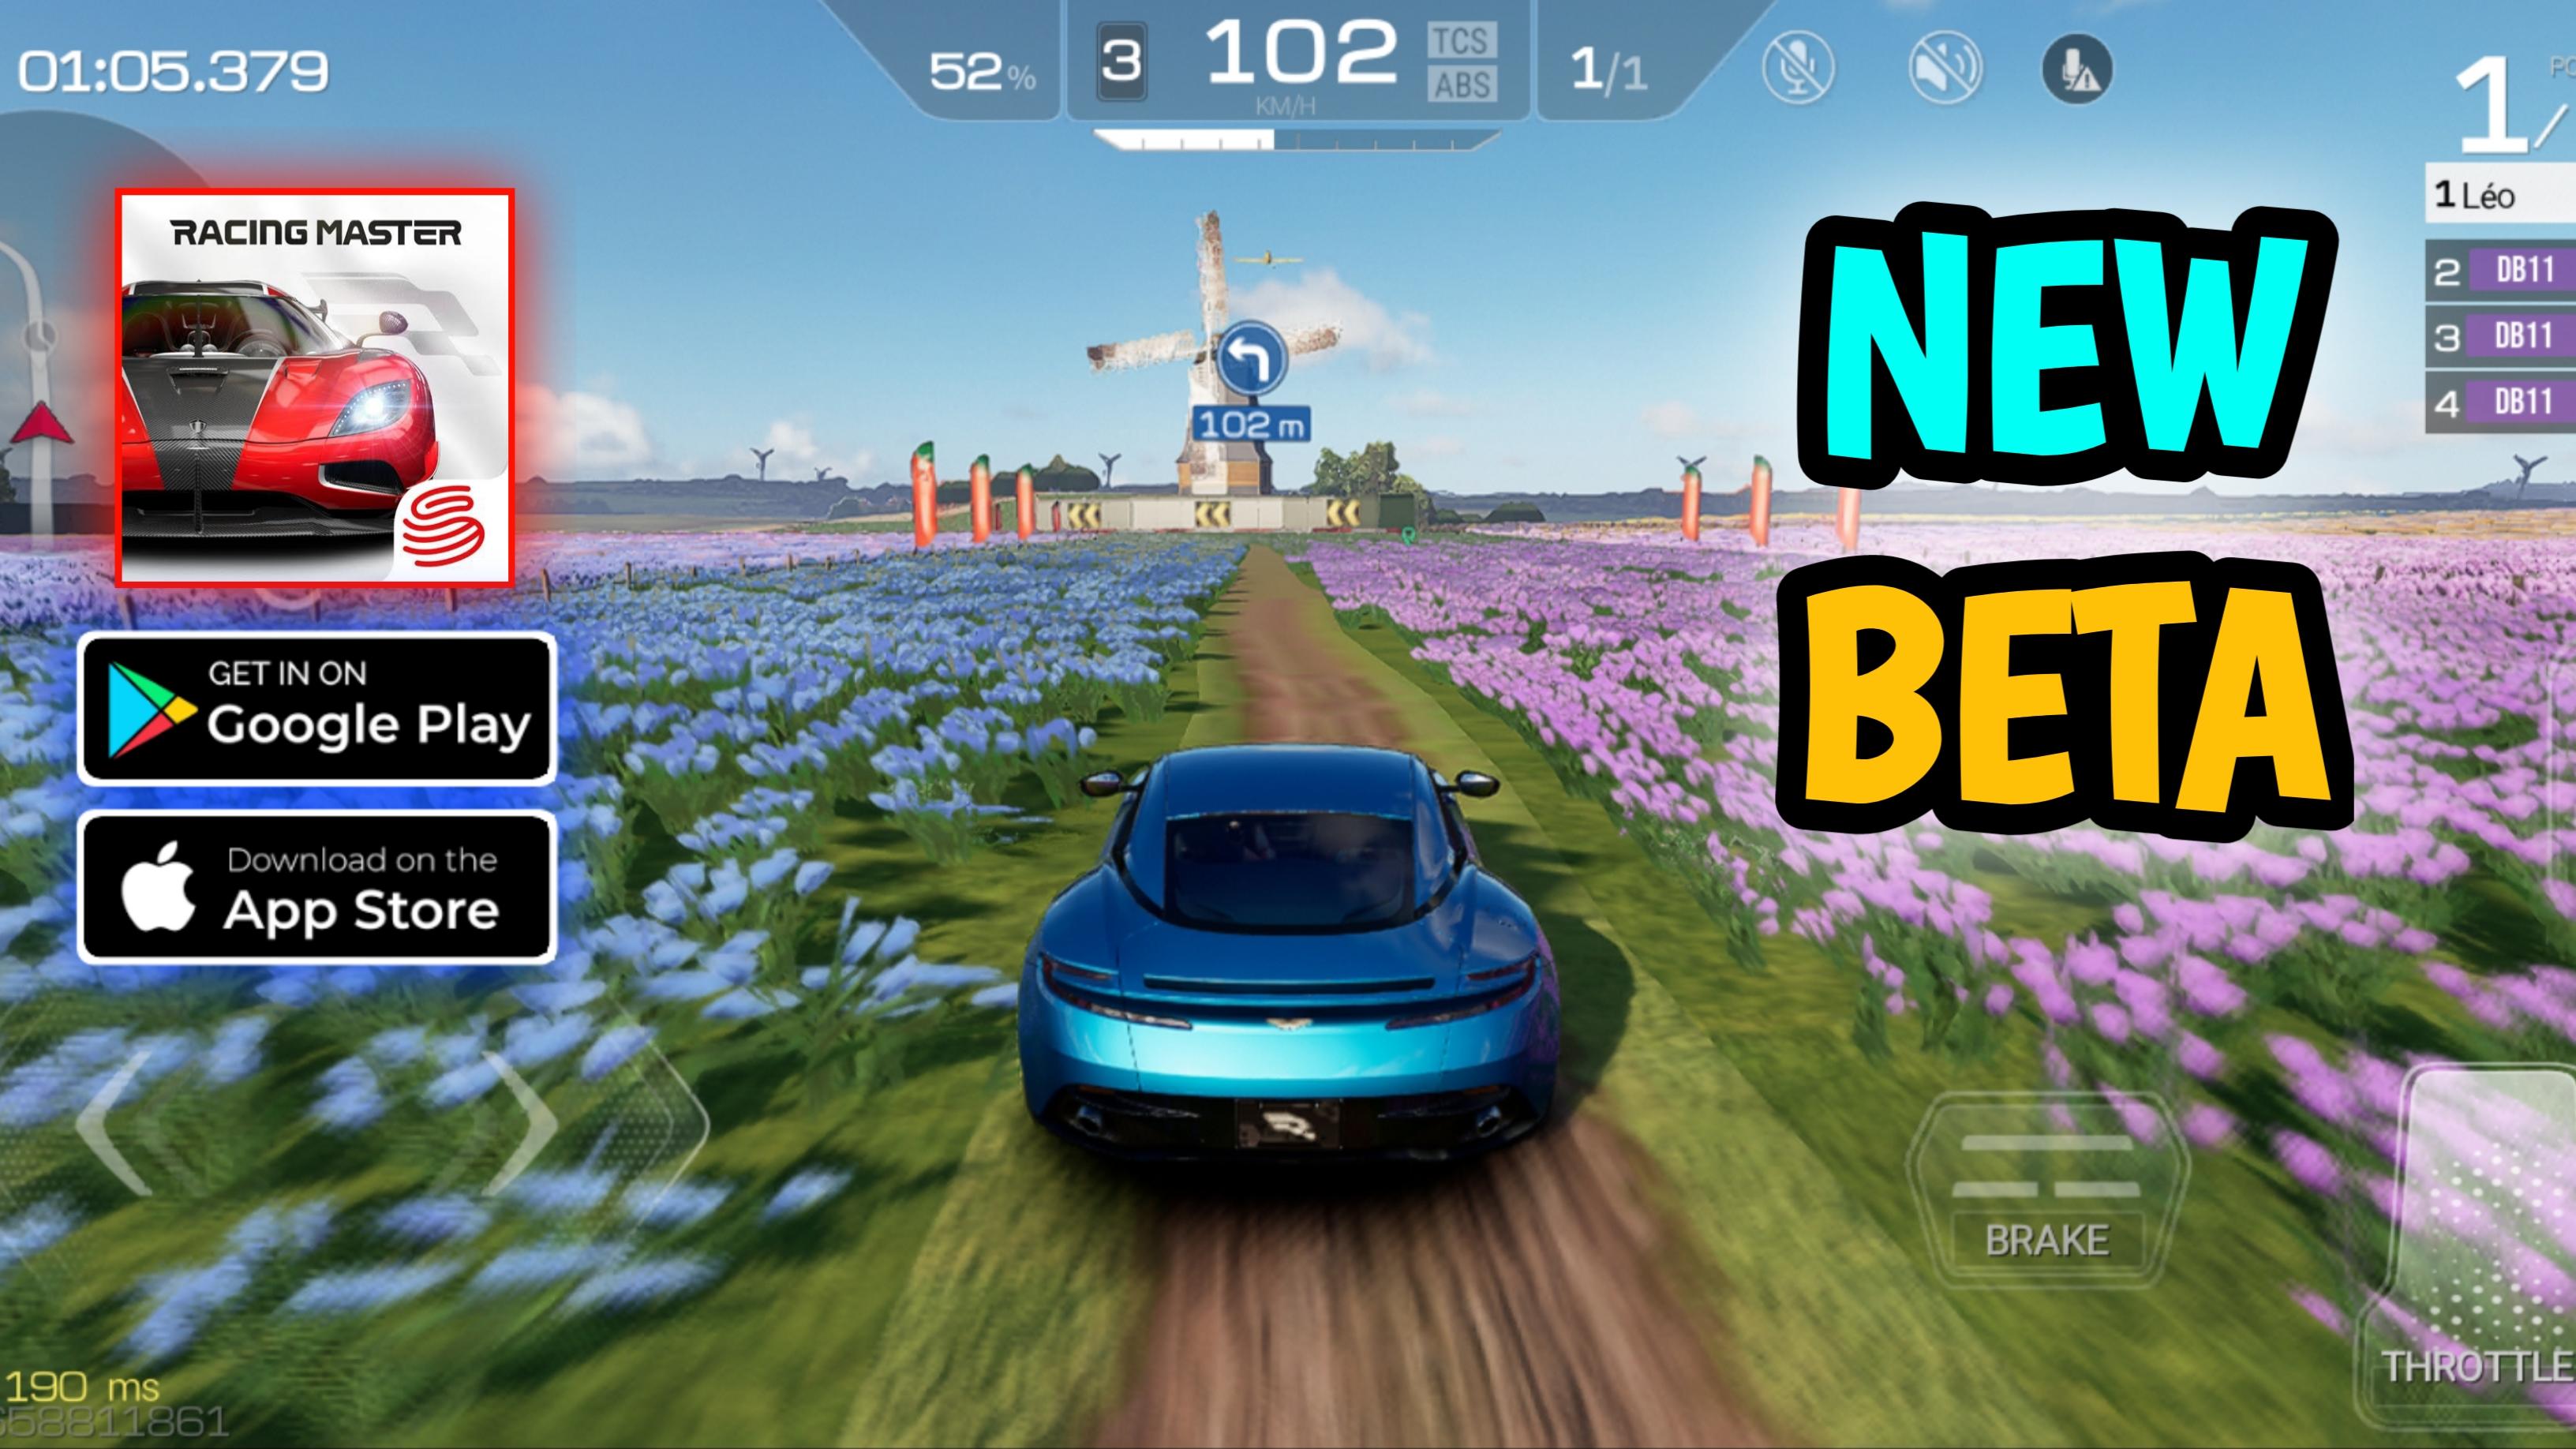 Racing in Car on the App Store